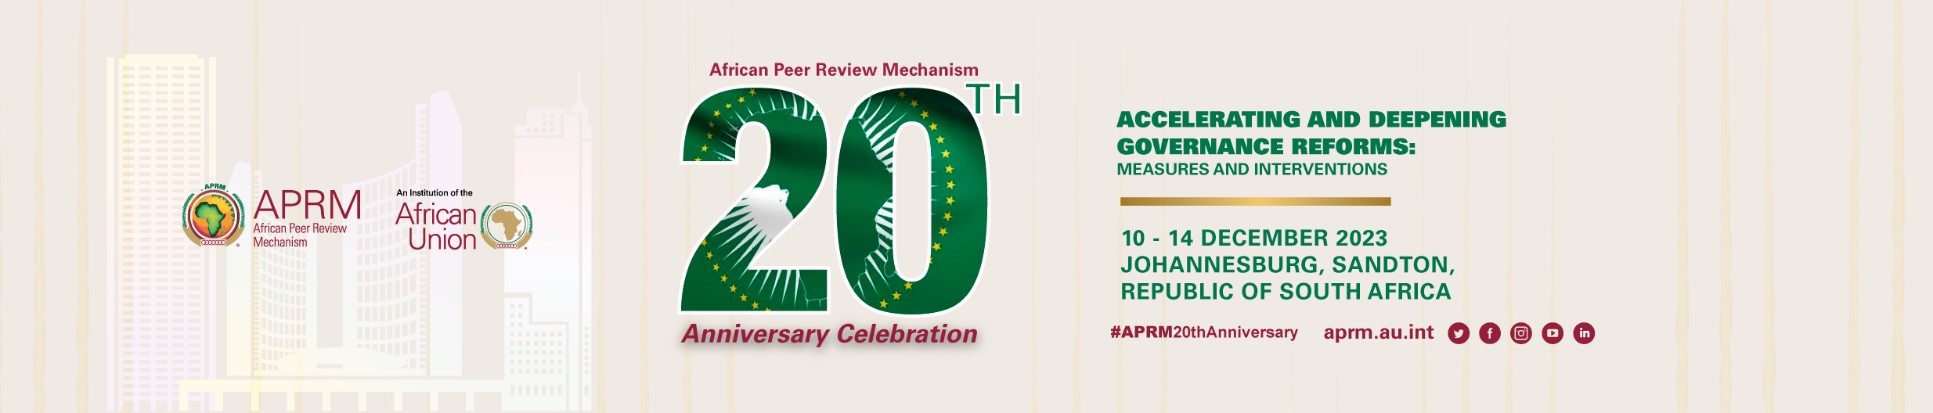 AFRICAN PEER REVIEW MECHANISM 20TH ANNIVERSARY CELEBRATION